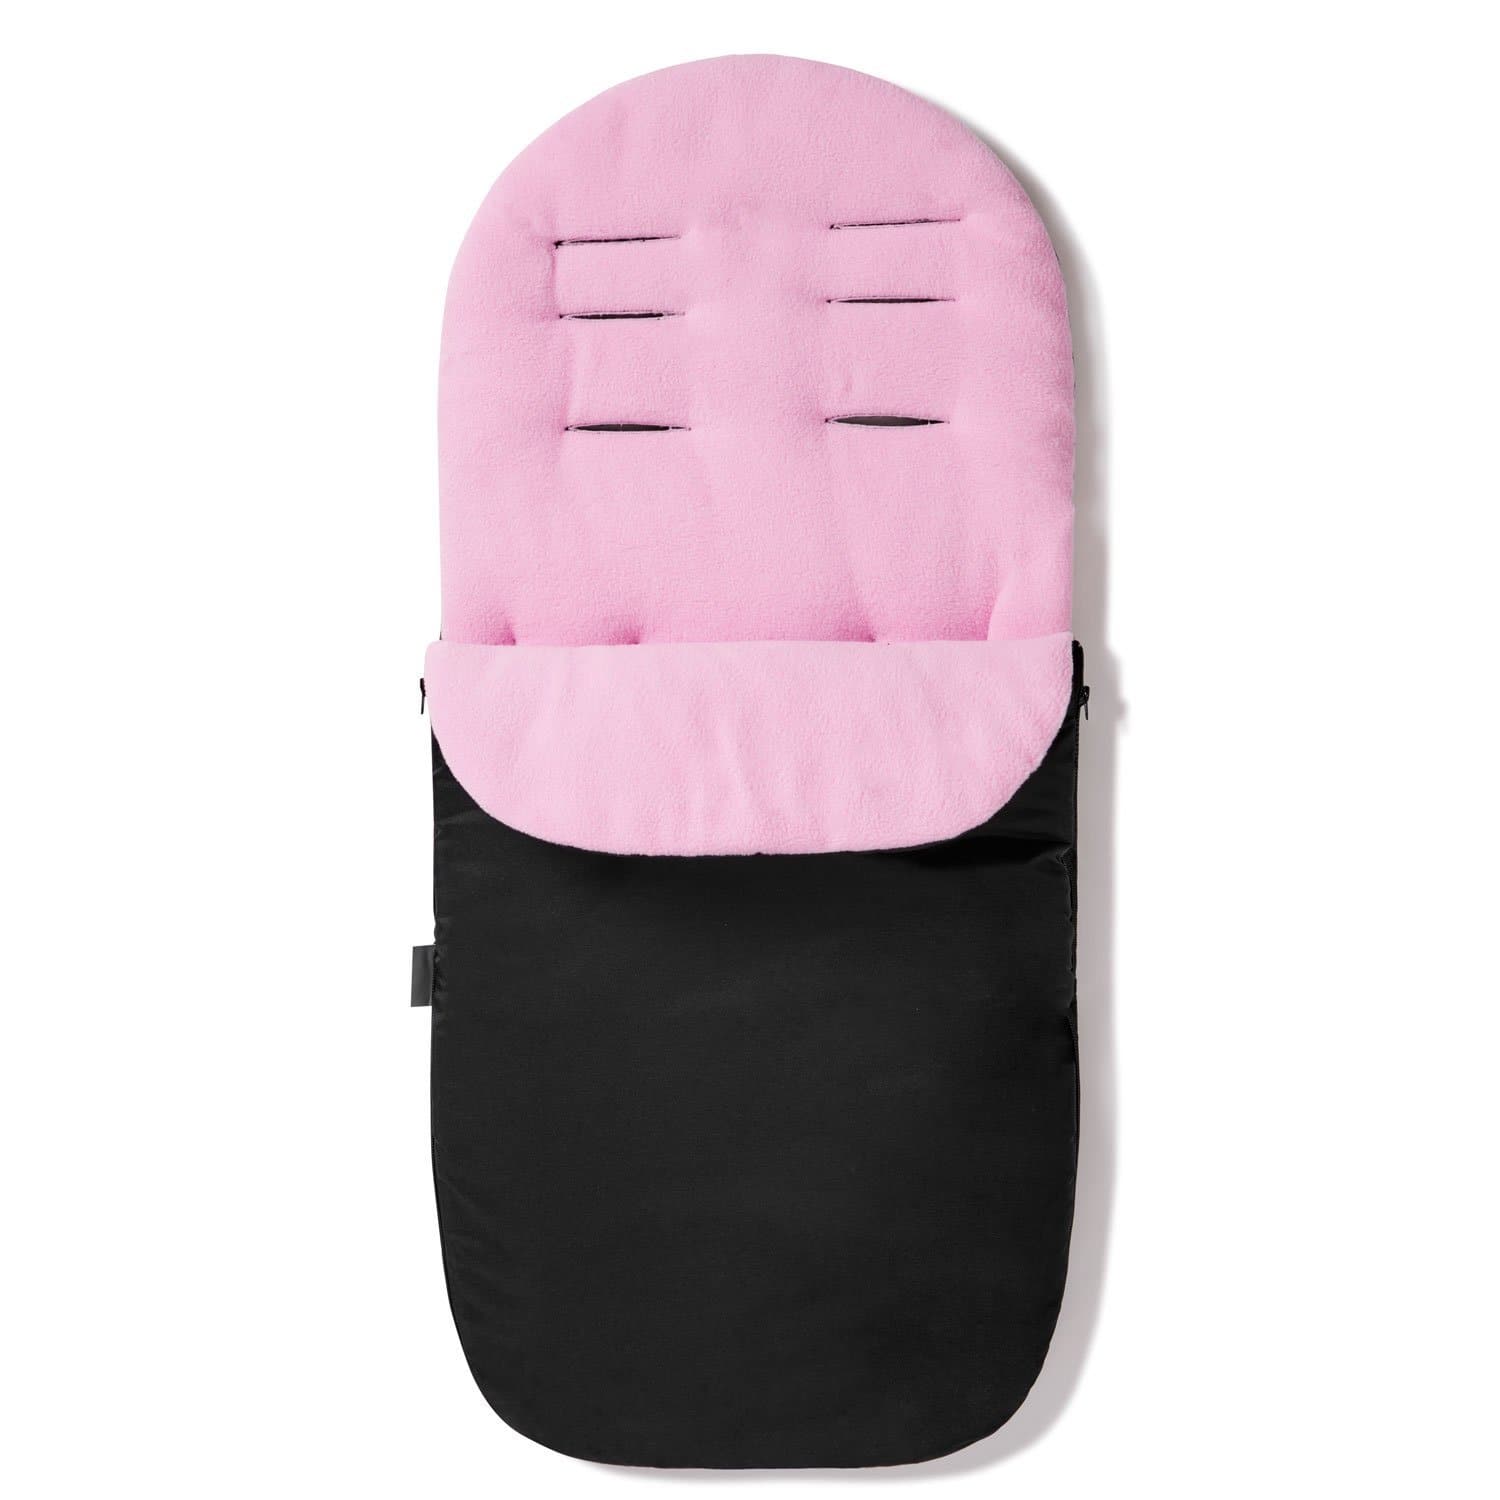 Footmuff / Cosy Toes Compatible with Orbit - Light Pink / Fits All Models | For Your Little One